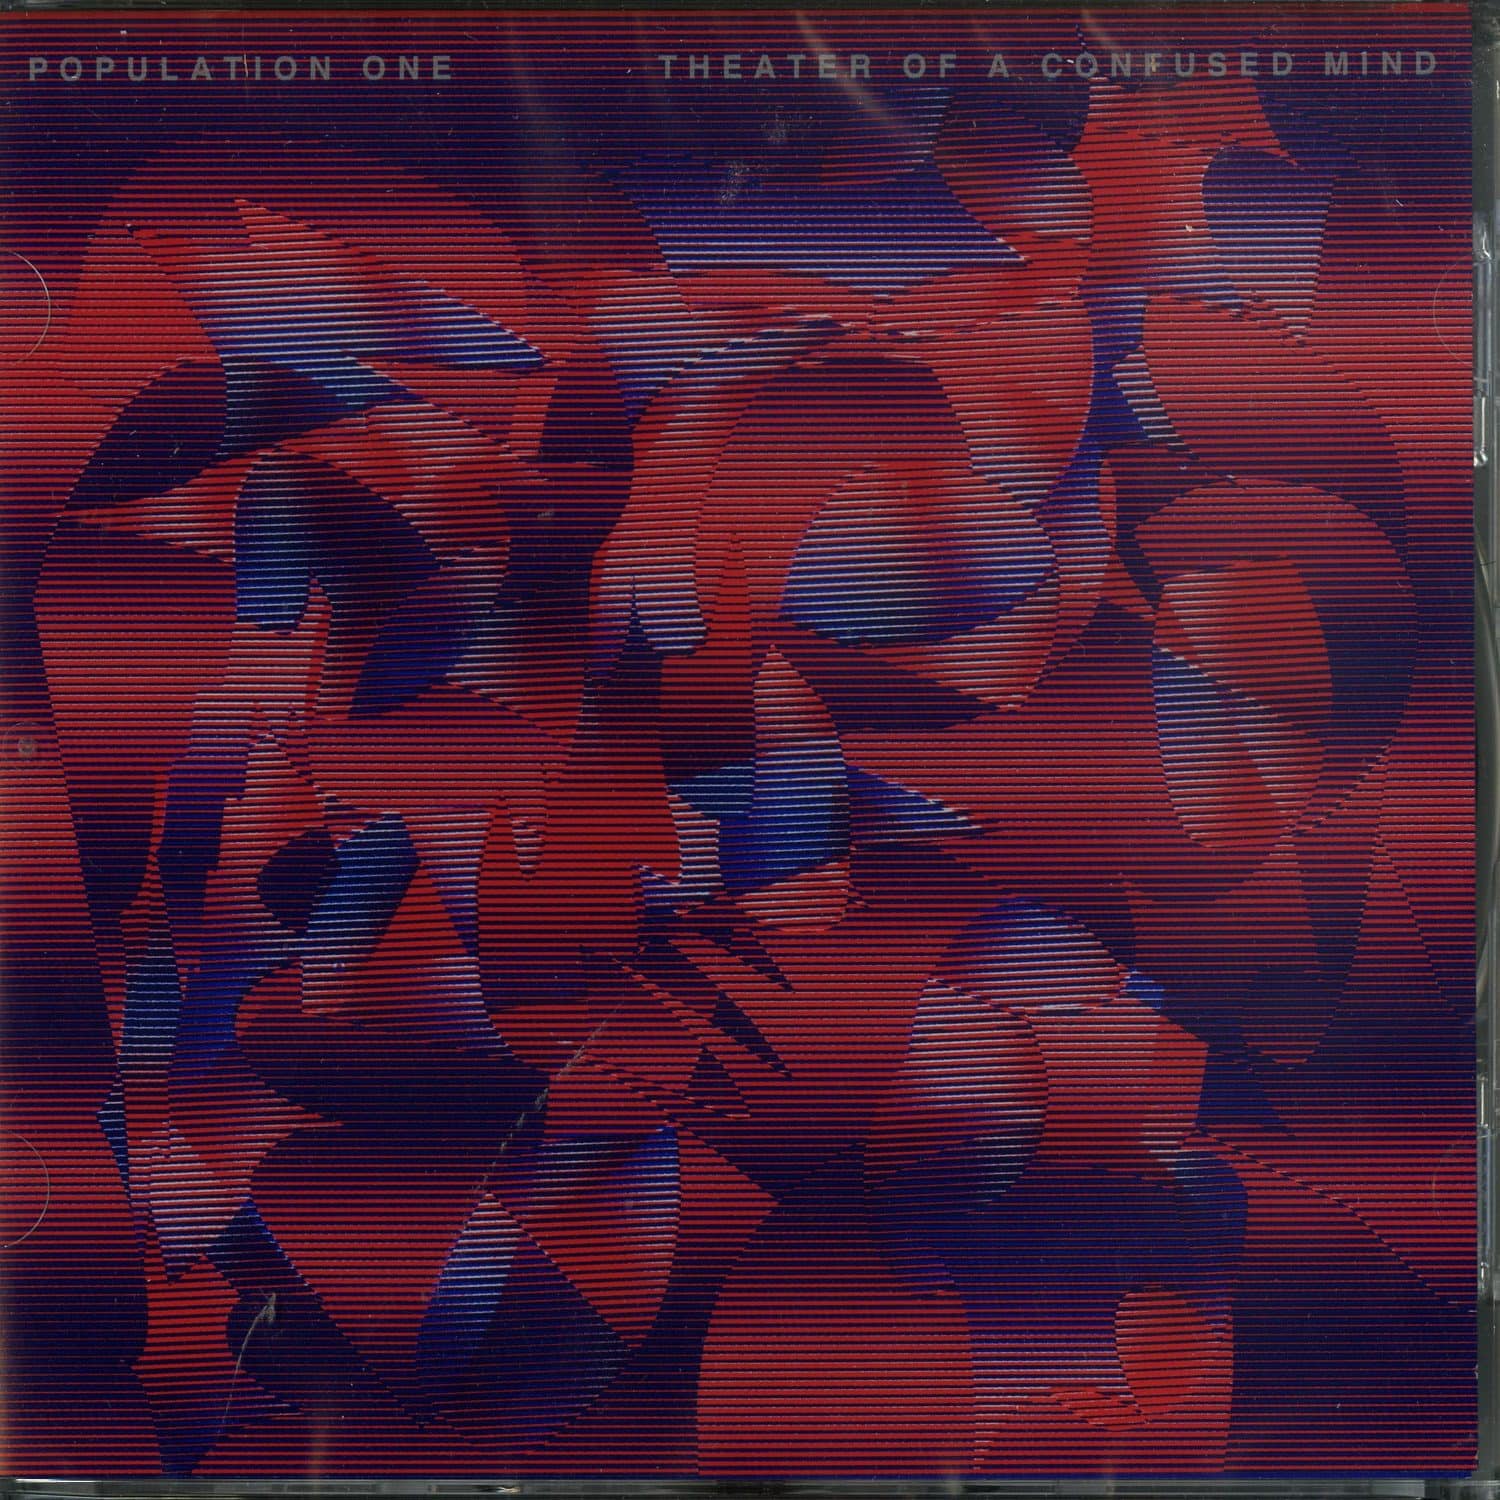 Population One - THEATER OF A CONFUSED MIND 